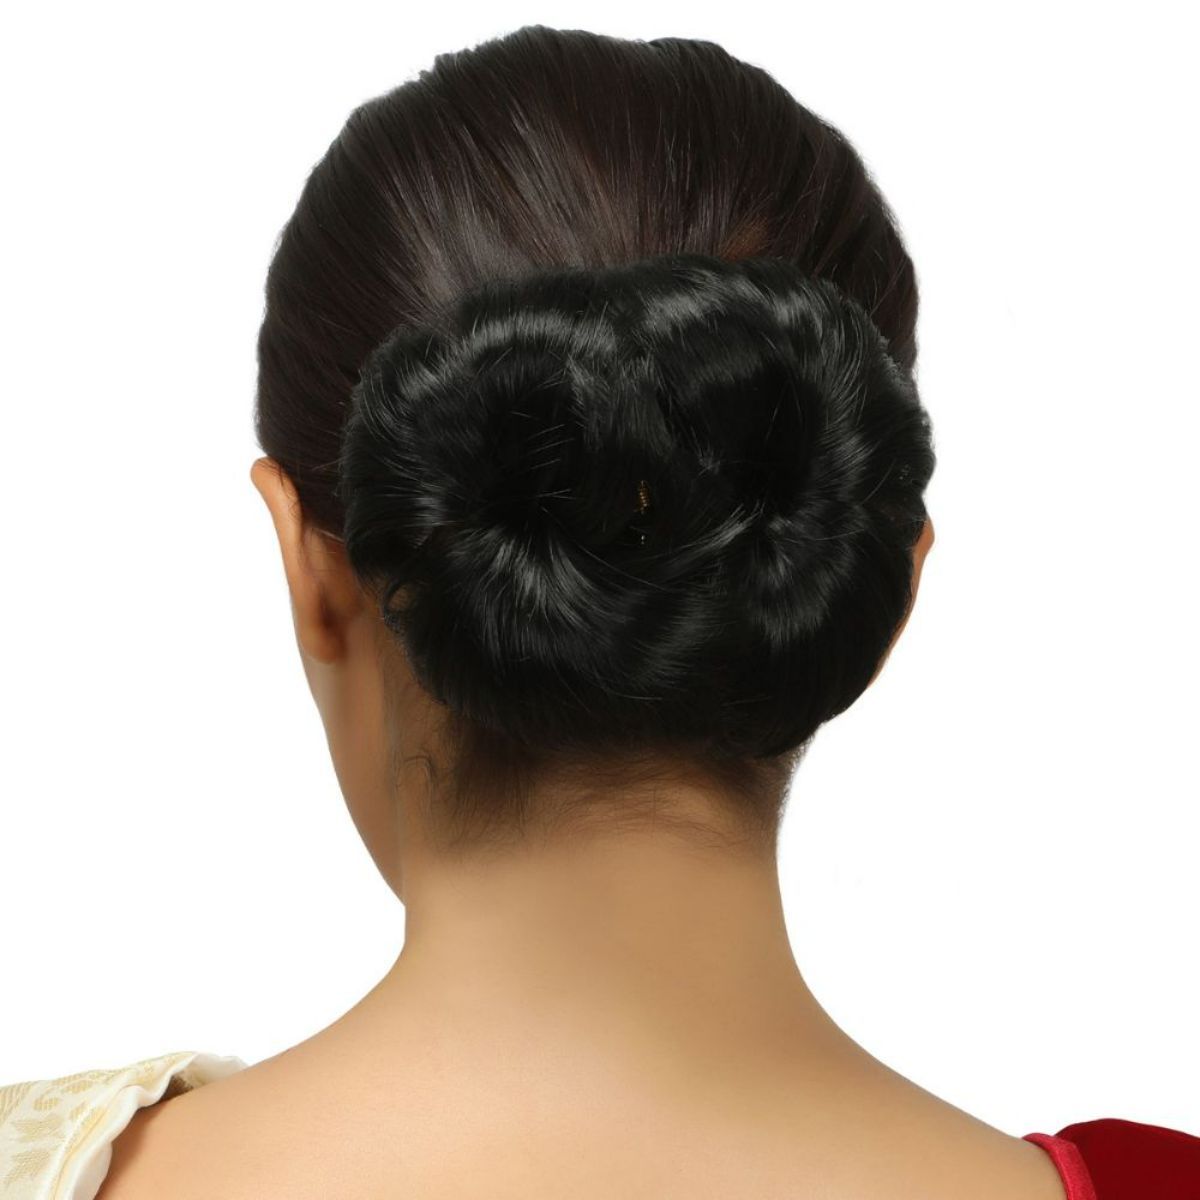 Accessher Black Colour Hair Bun Extension Wig with Large Black Clutcher  Buy Accessher Black Colour Hair Bun Extension Wig with Large Black Clutcher  Online at Best Price in India  Nykaa